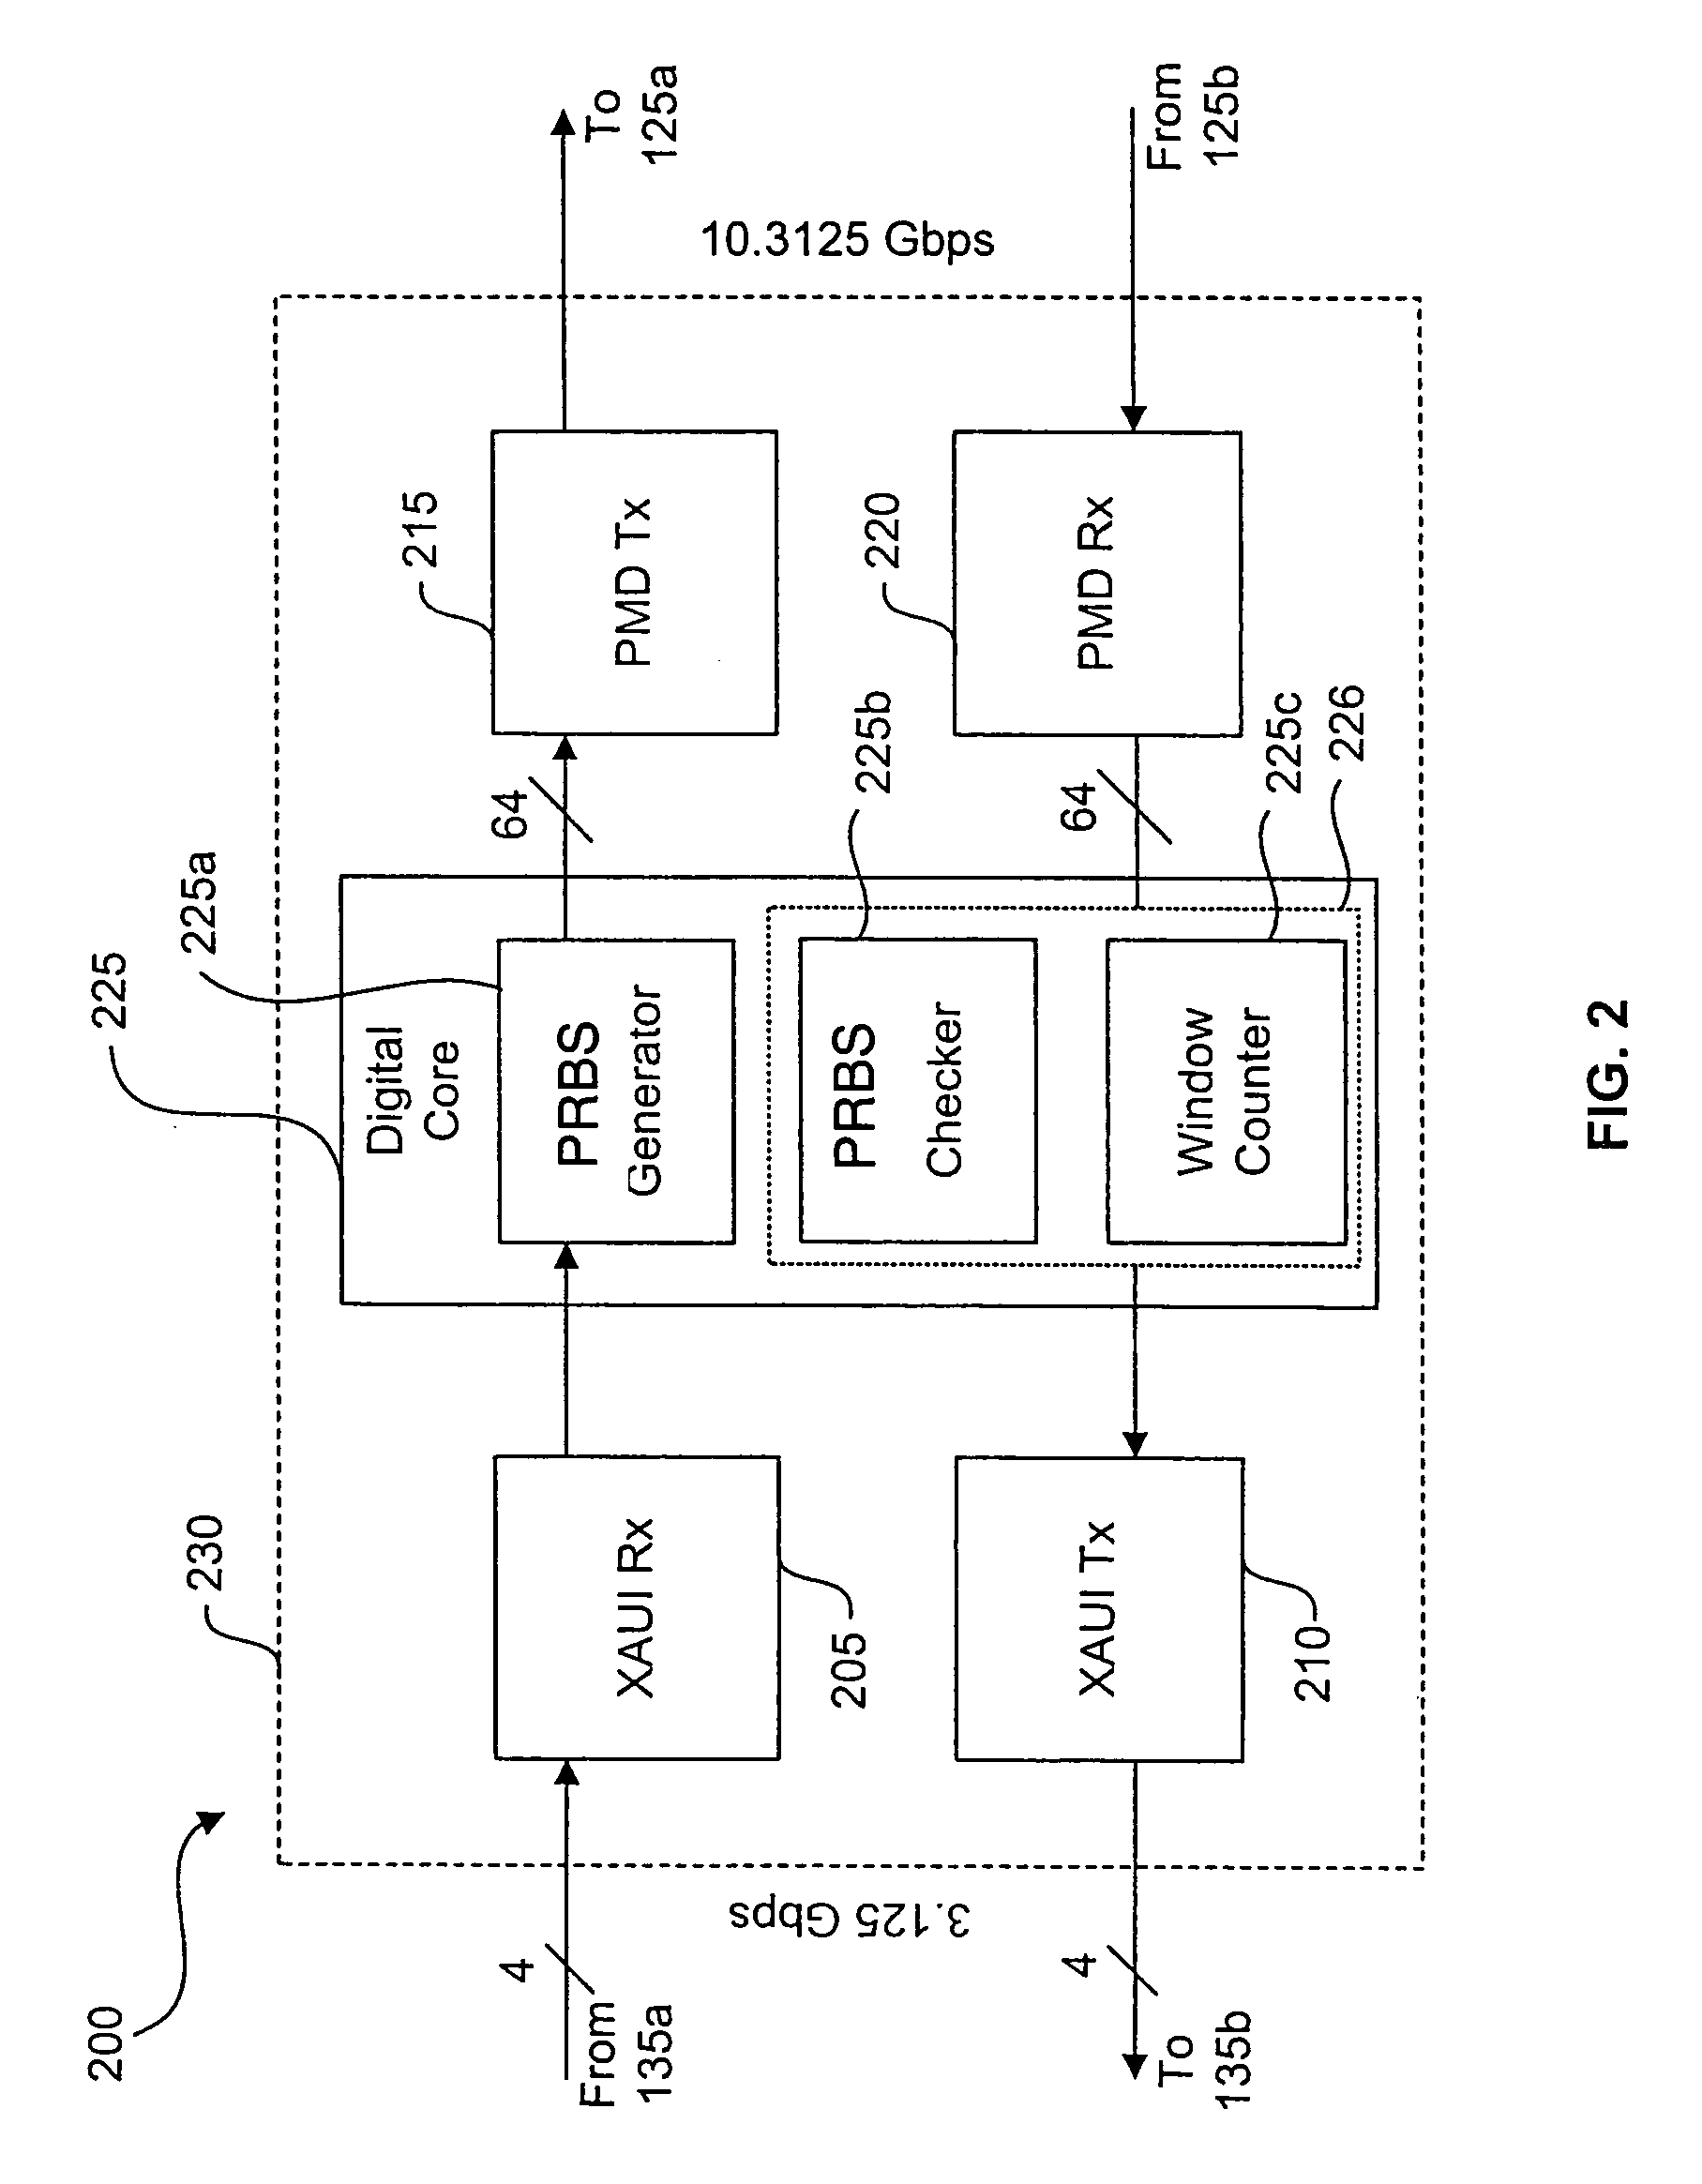 System and method for determining on-chip bit error rate (BER) in a communication system